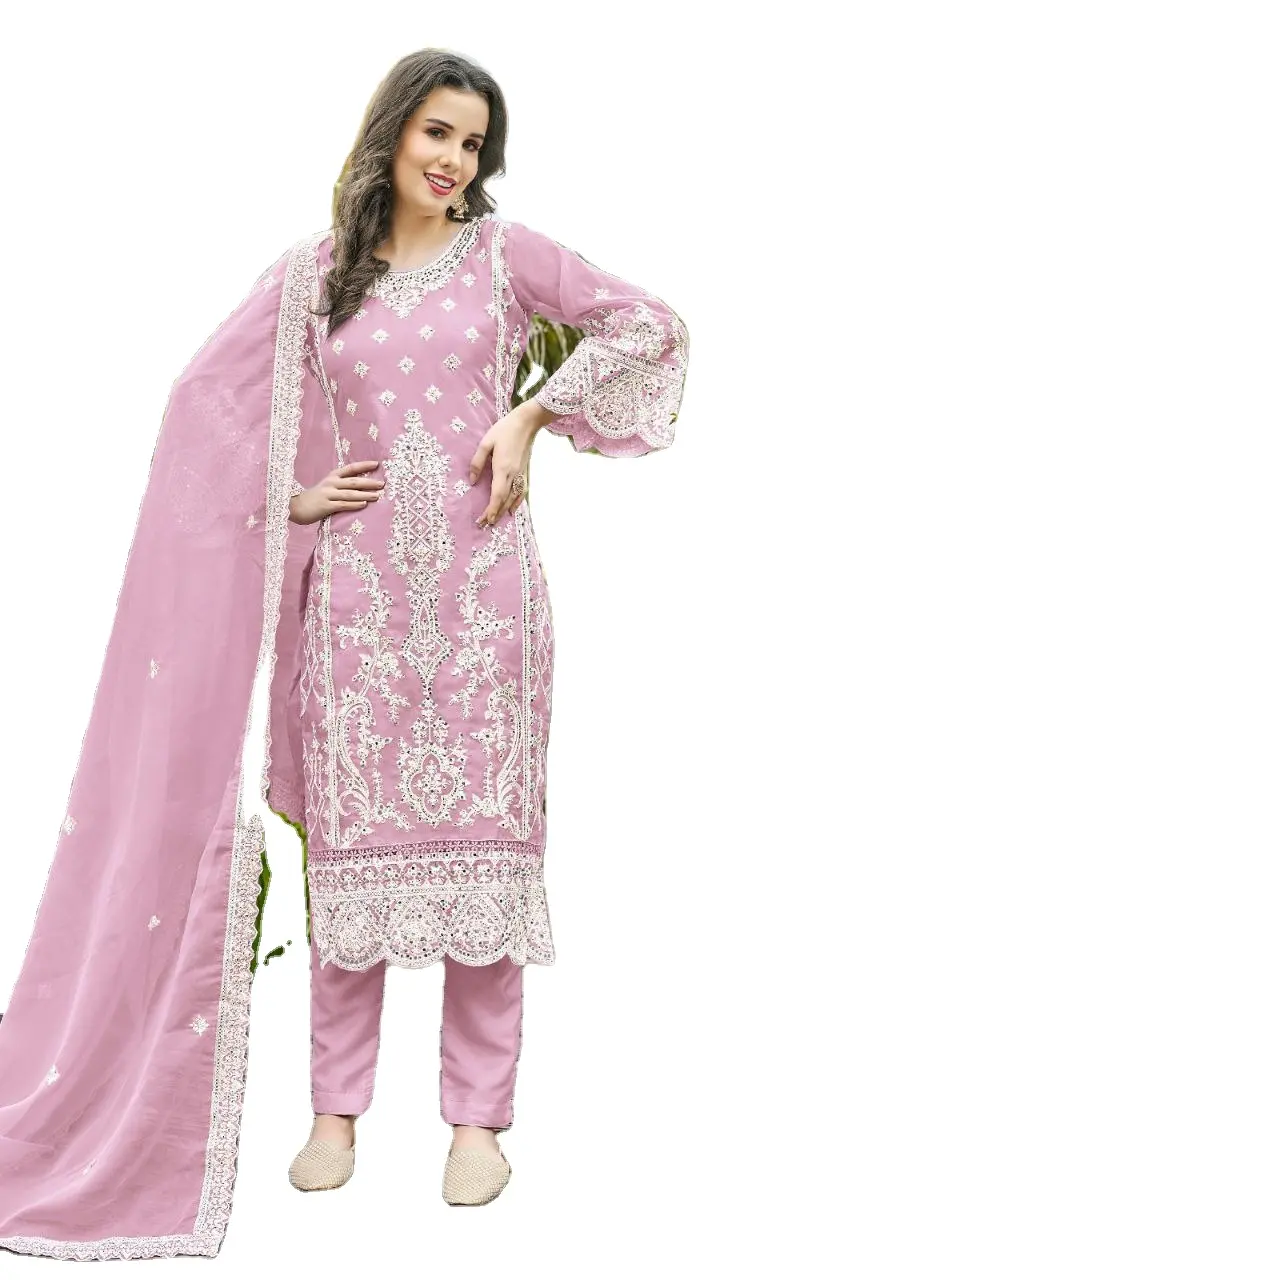 Most beautiful Cool Pink Cotton Hand Embroidered Shalwar Kameez suits on Viscose fabric formal wears